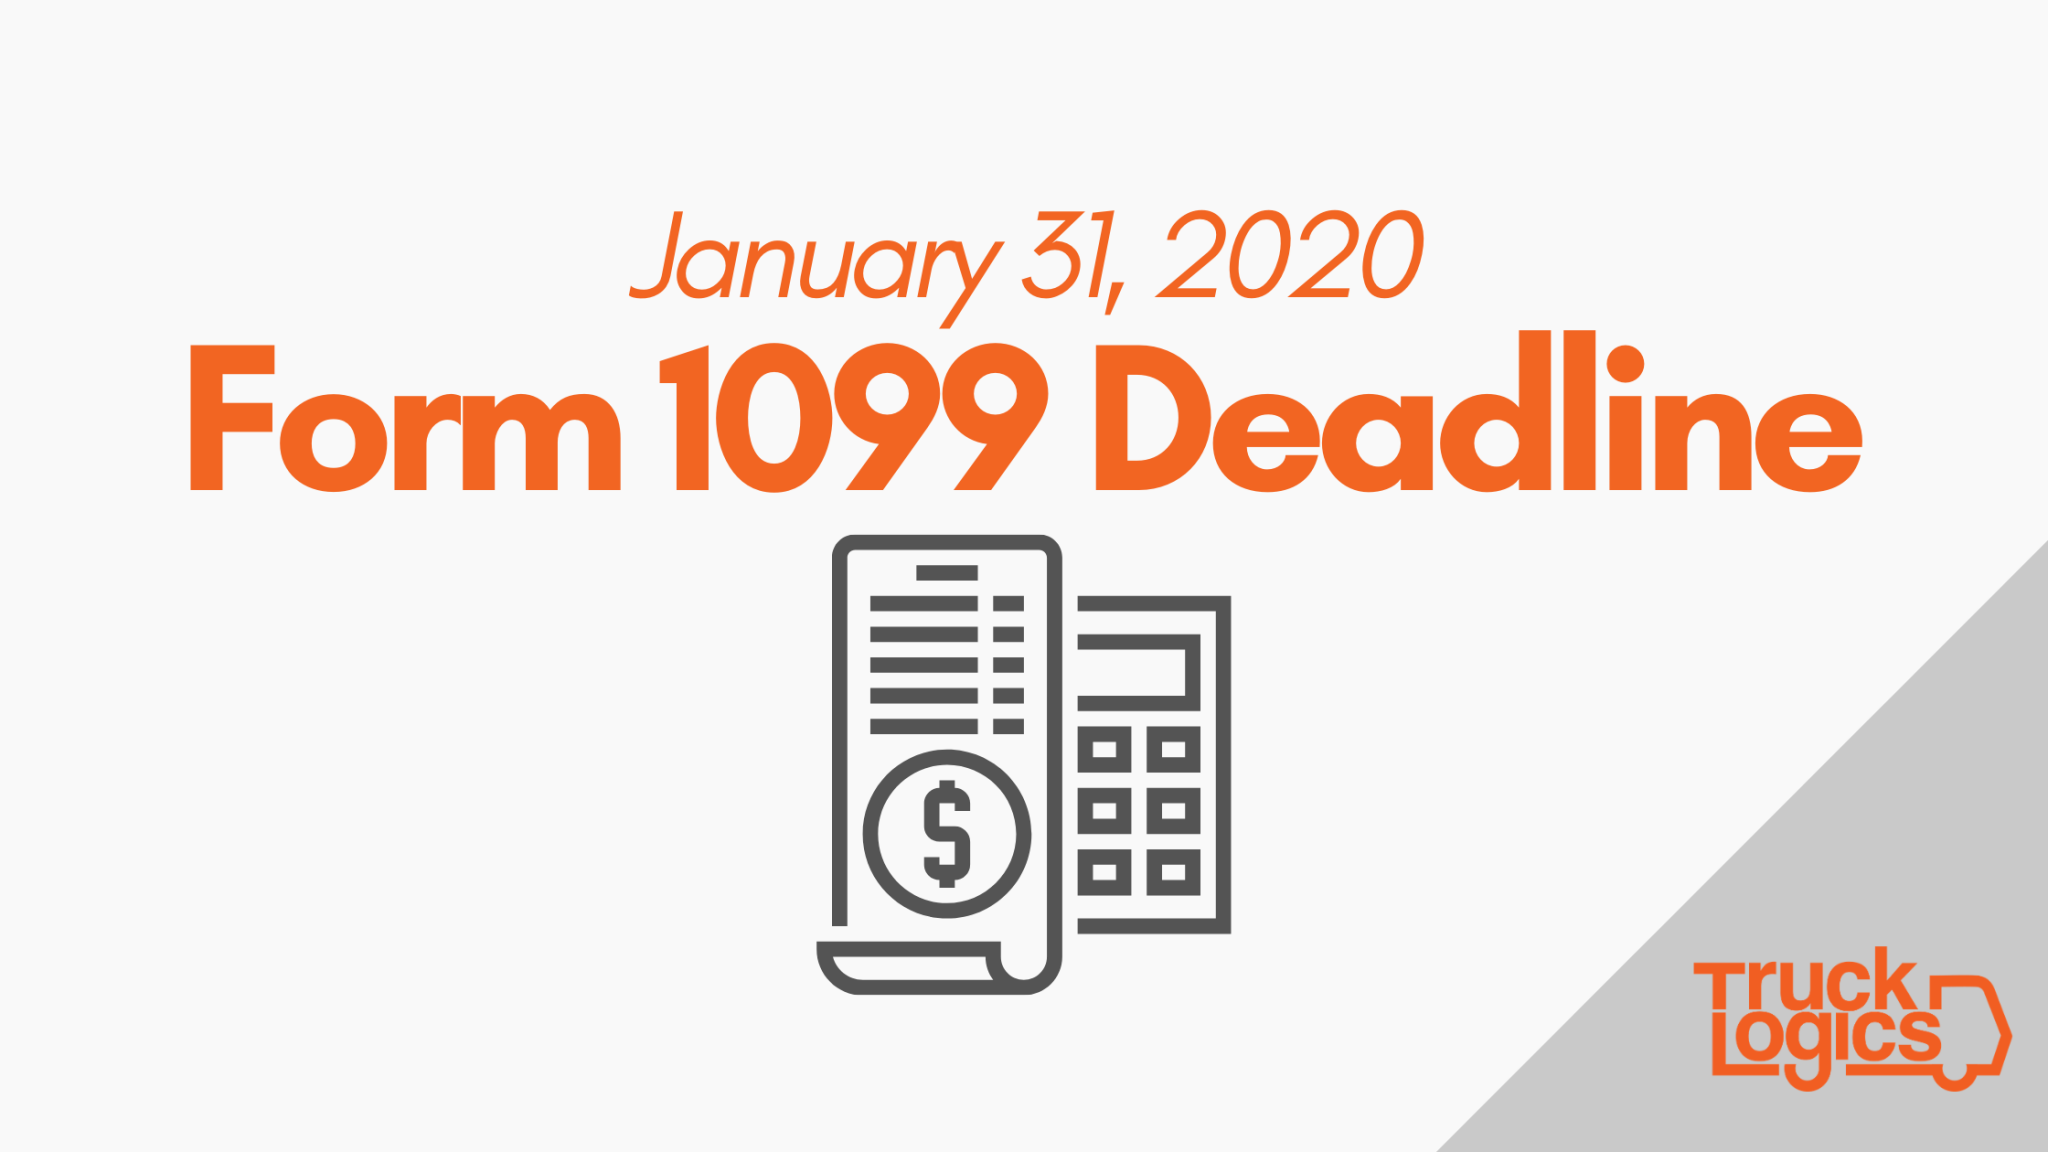 Your Form 1099 Deadline is Coming! TruckLogics